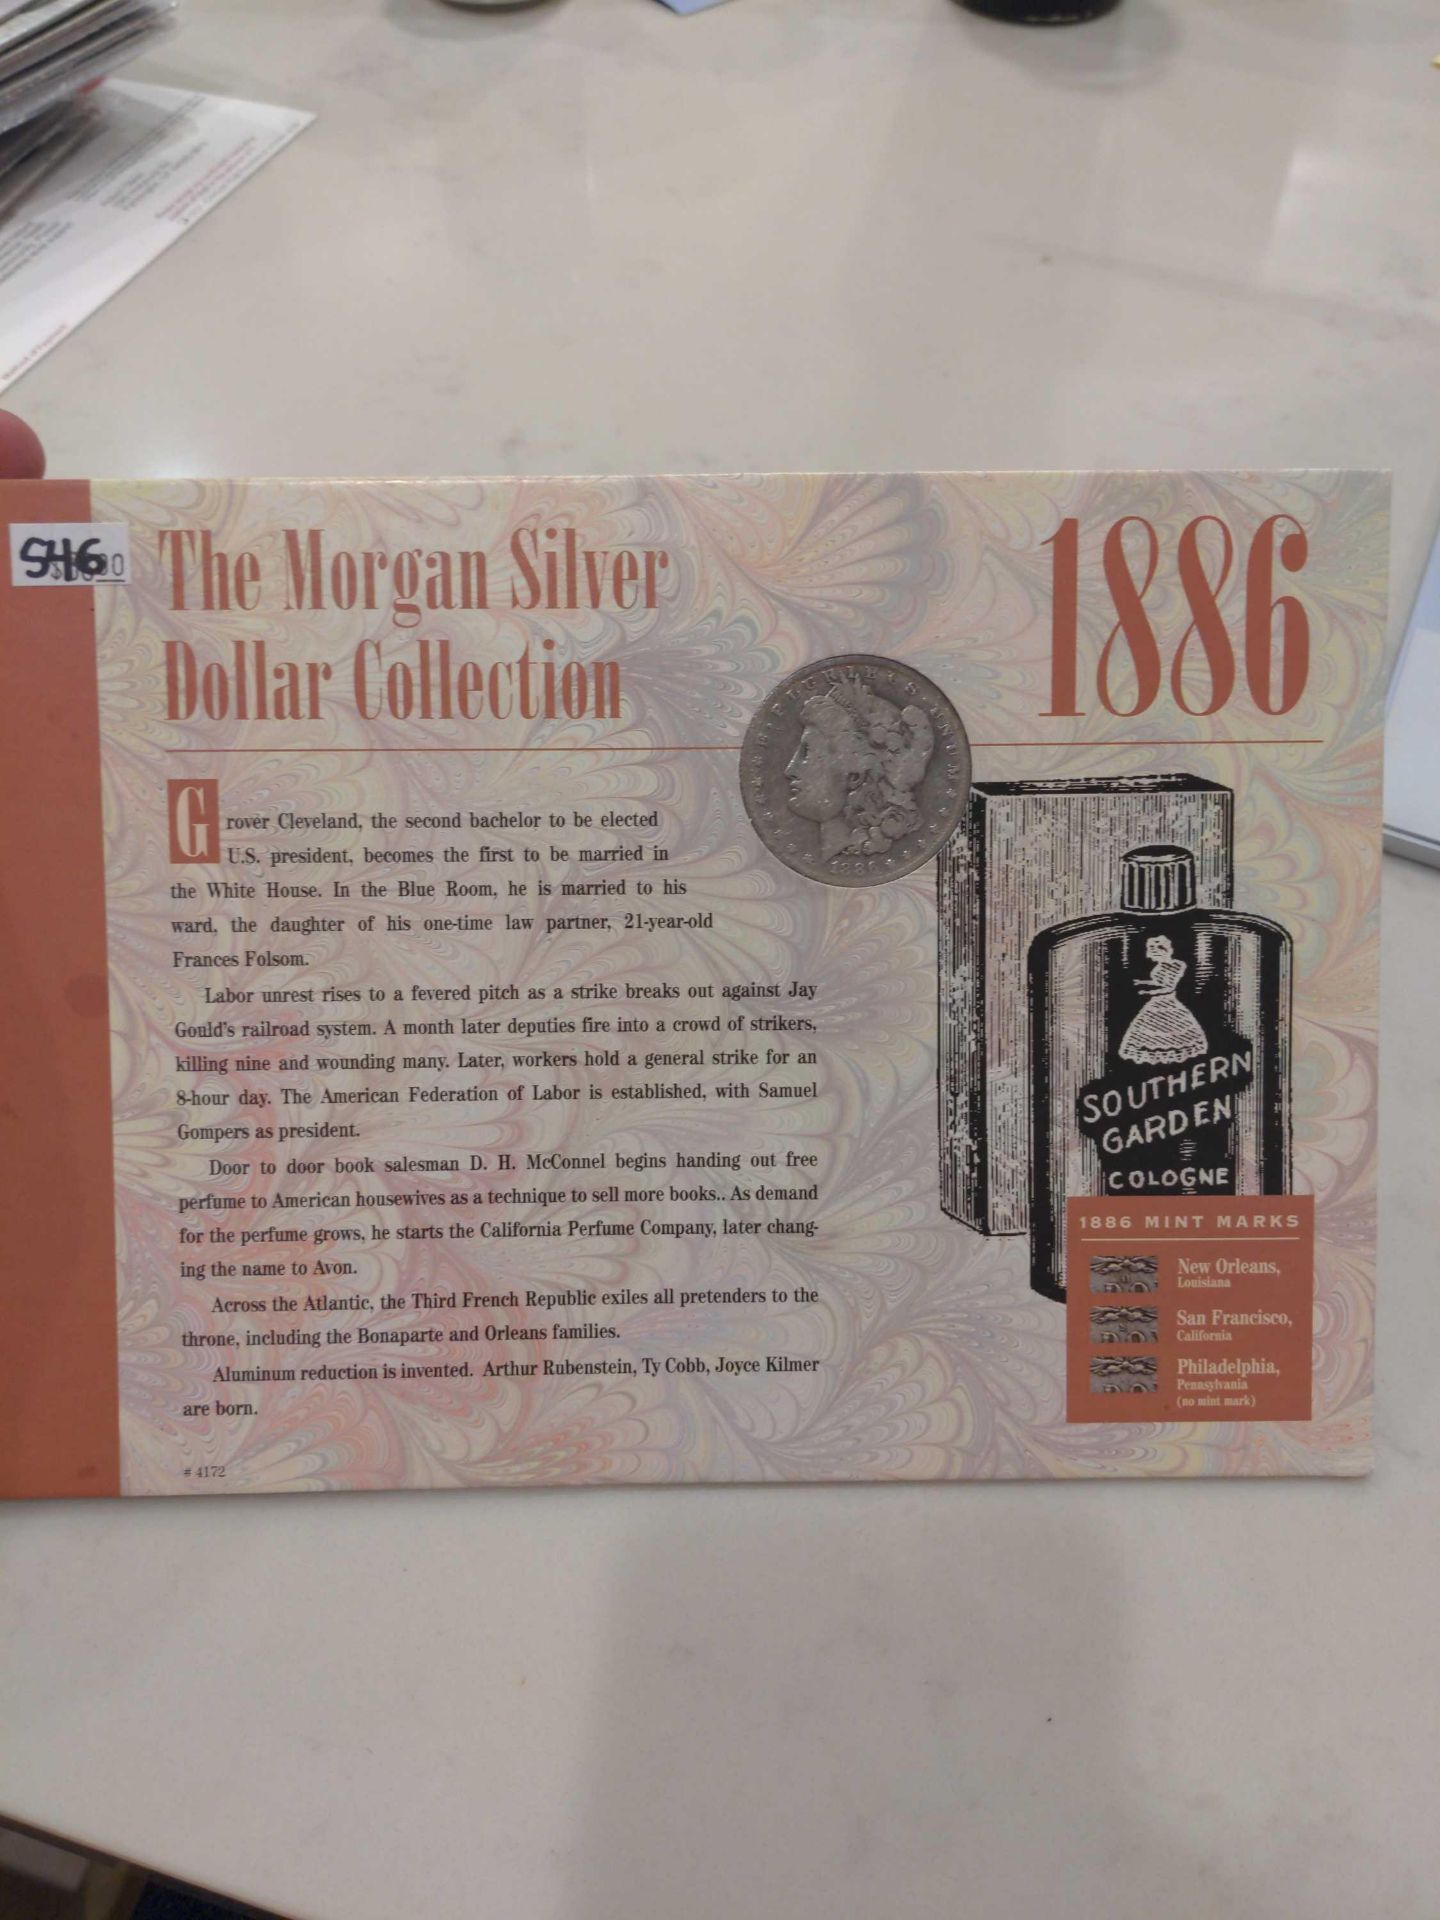 1886 Morgan Dollar with historical facts sleeve - Image 5 of 5